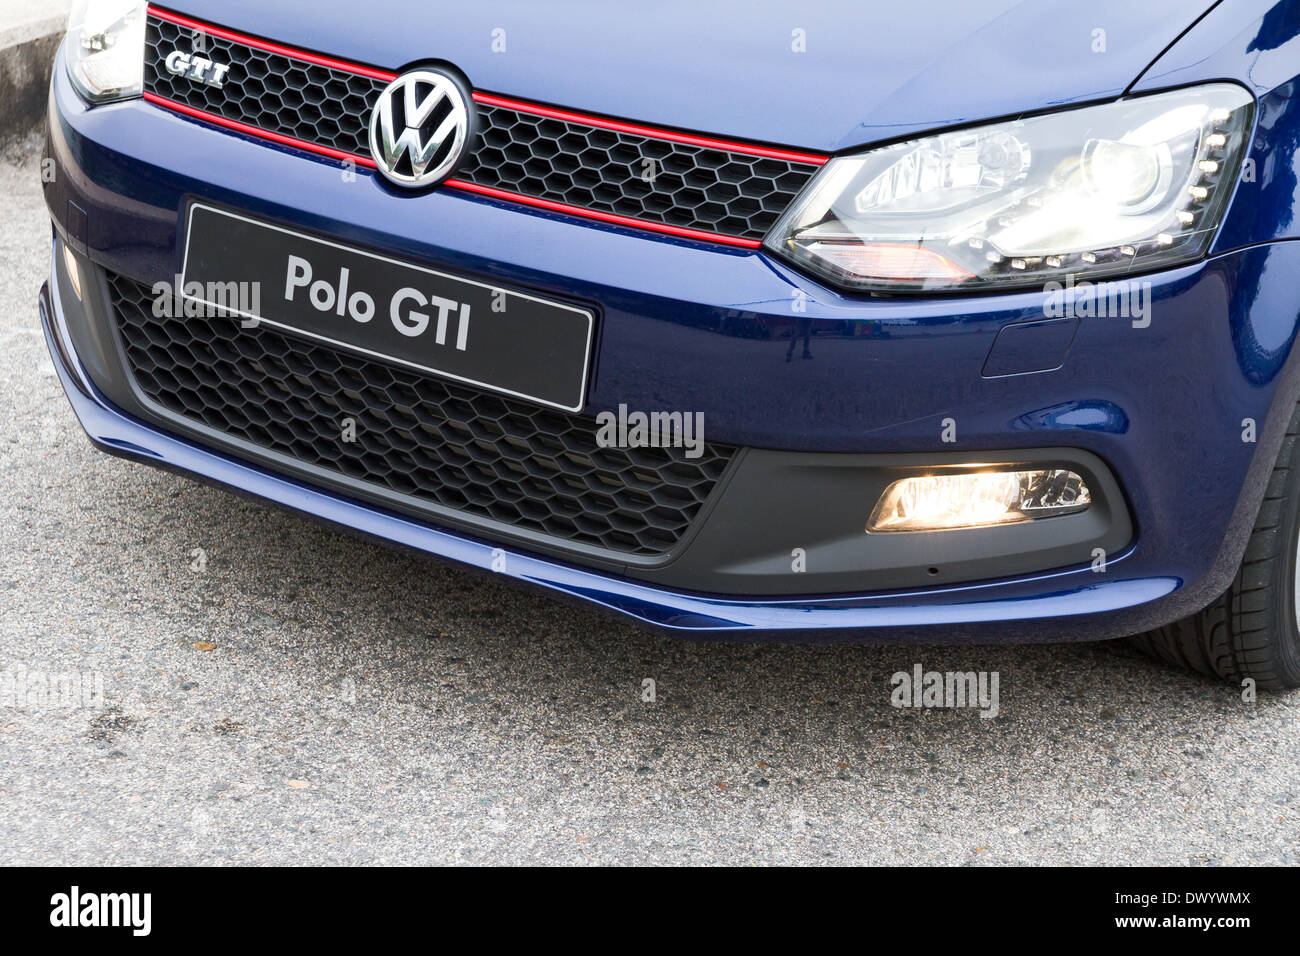 Volkswagen Polo GTI 2013 Model with blue colour Stock Photo - Alamy